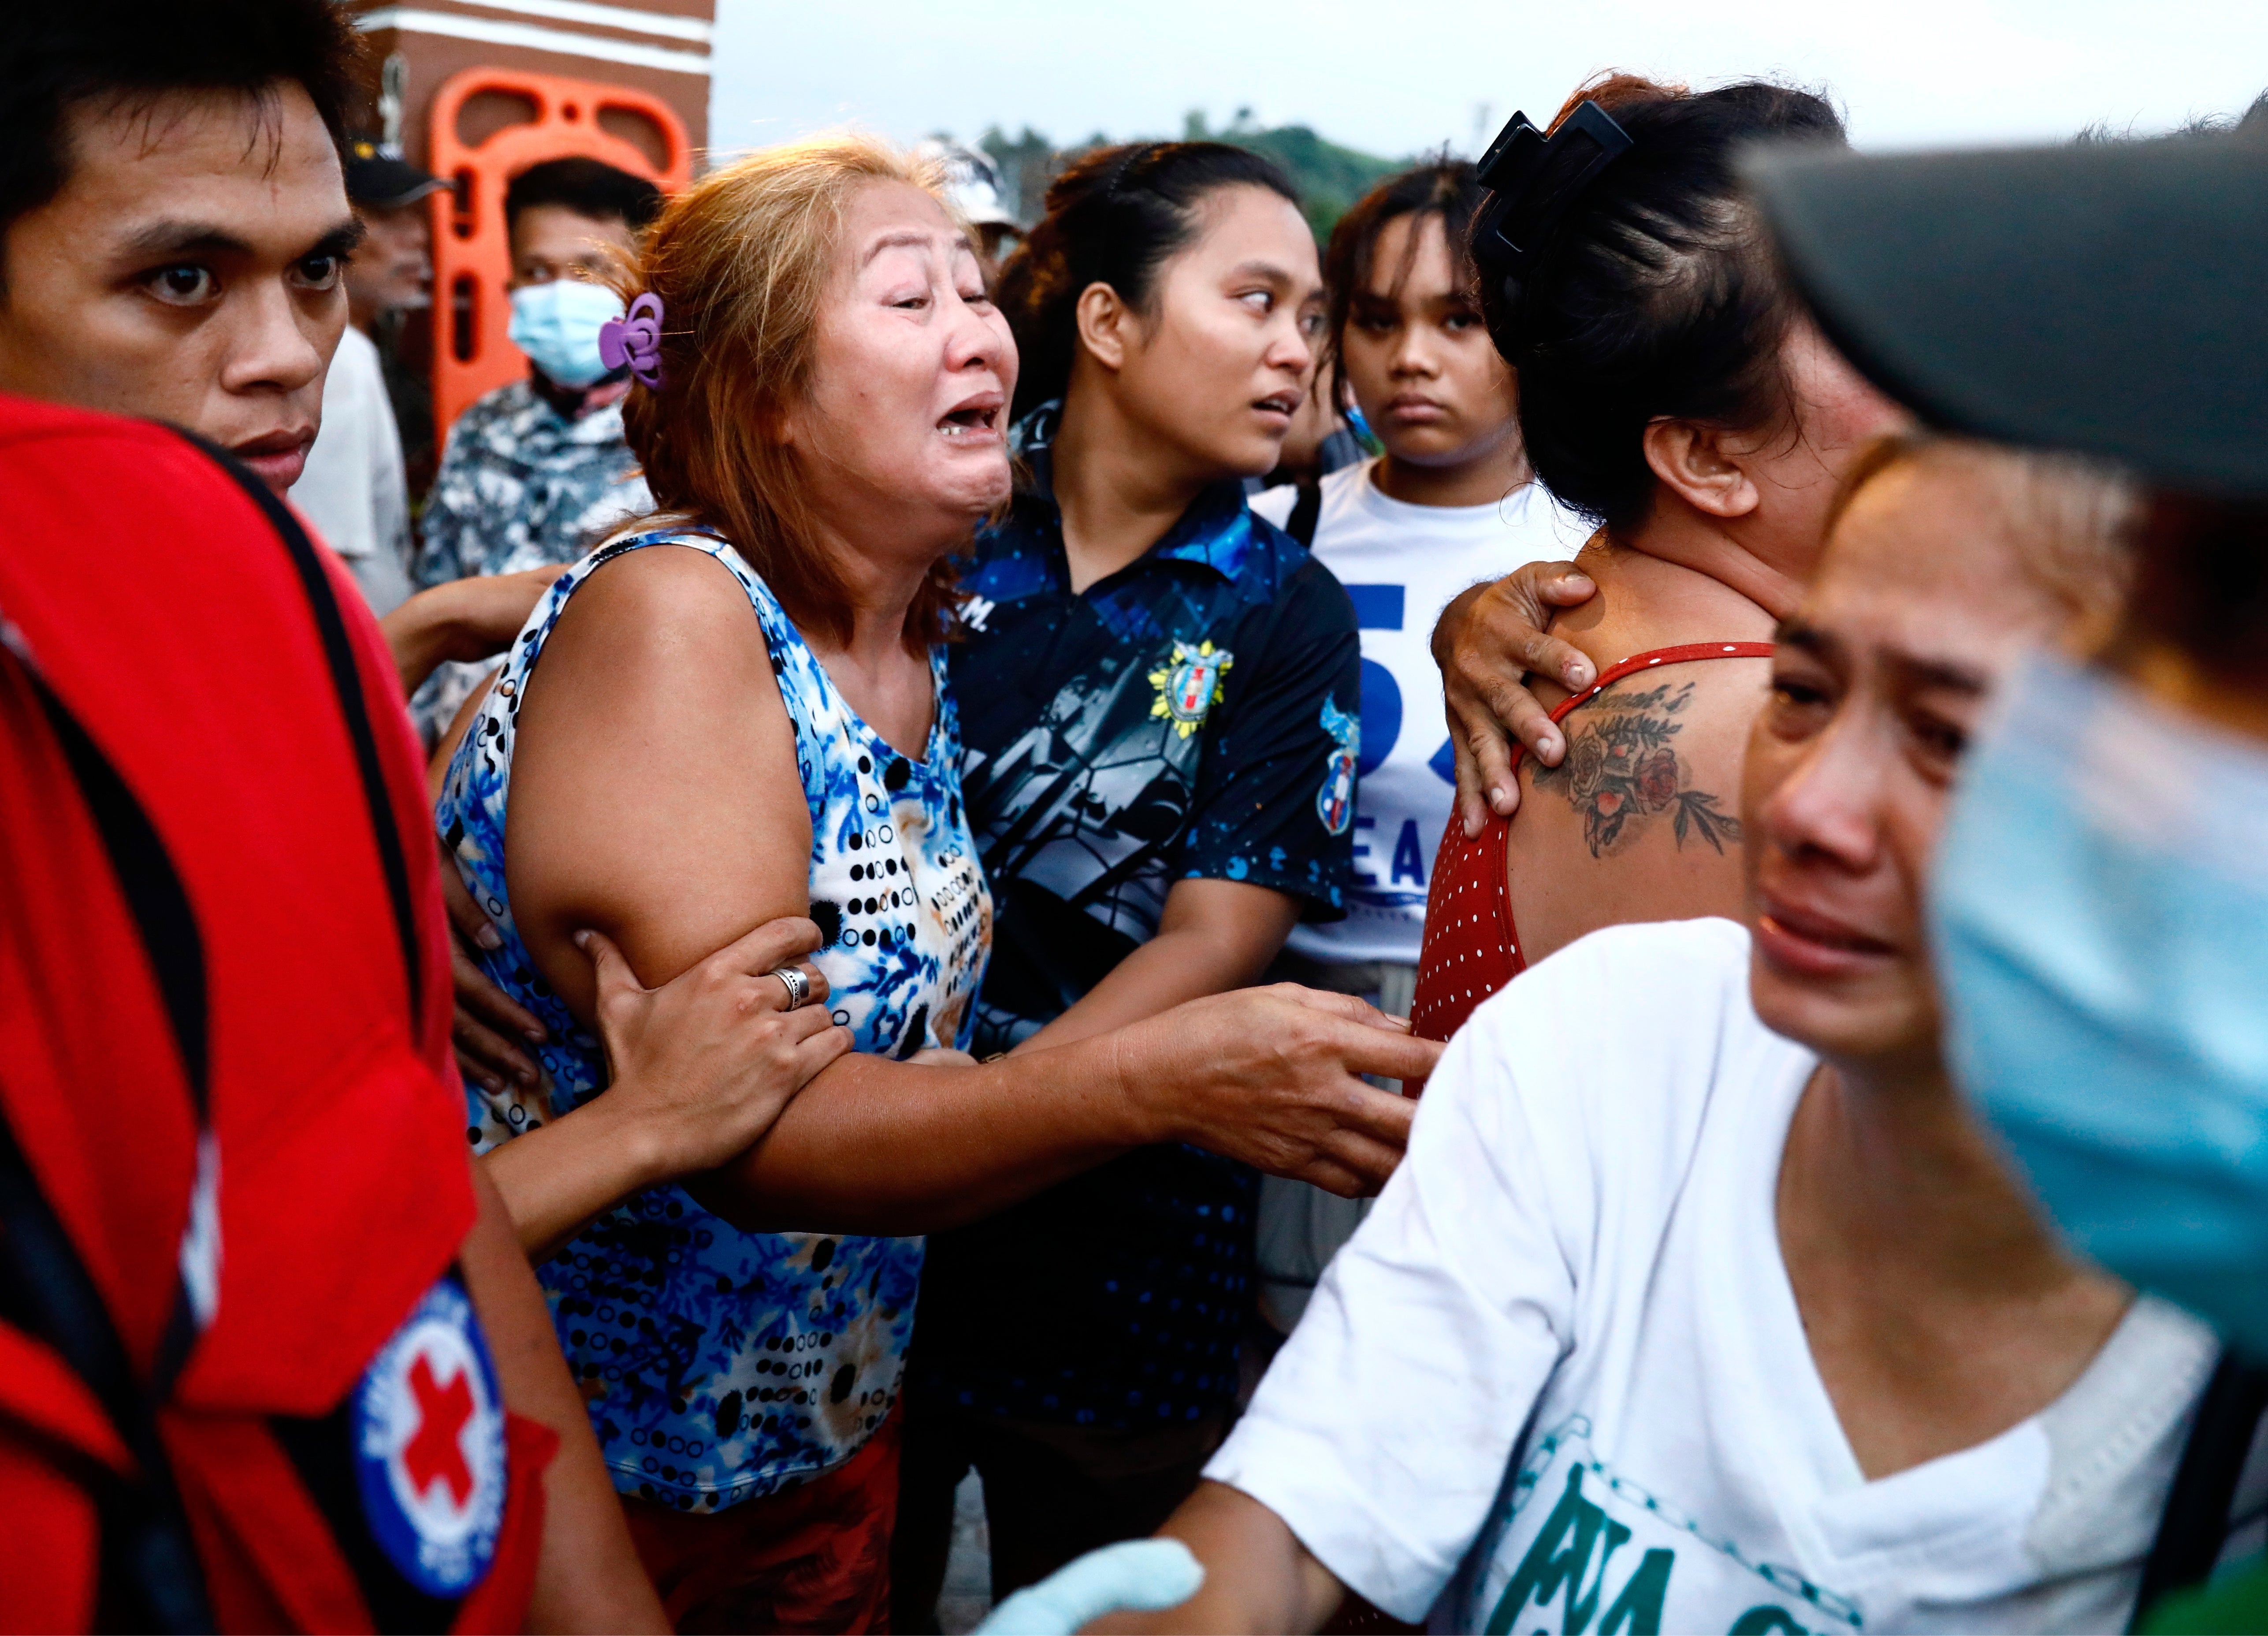 Fierce winds caused panic on ferry that capsized in Philippines